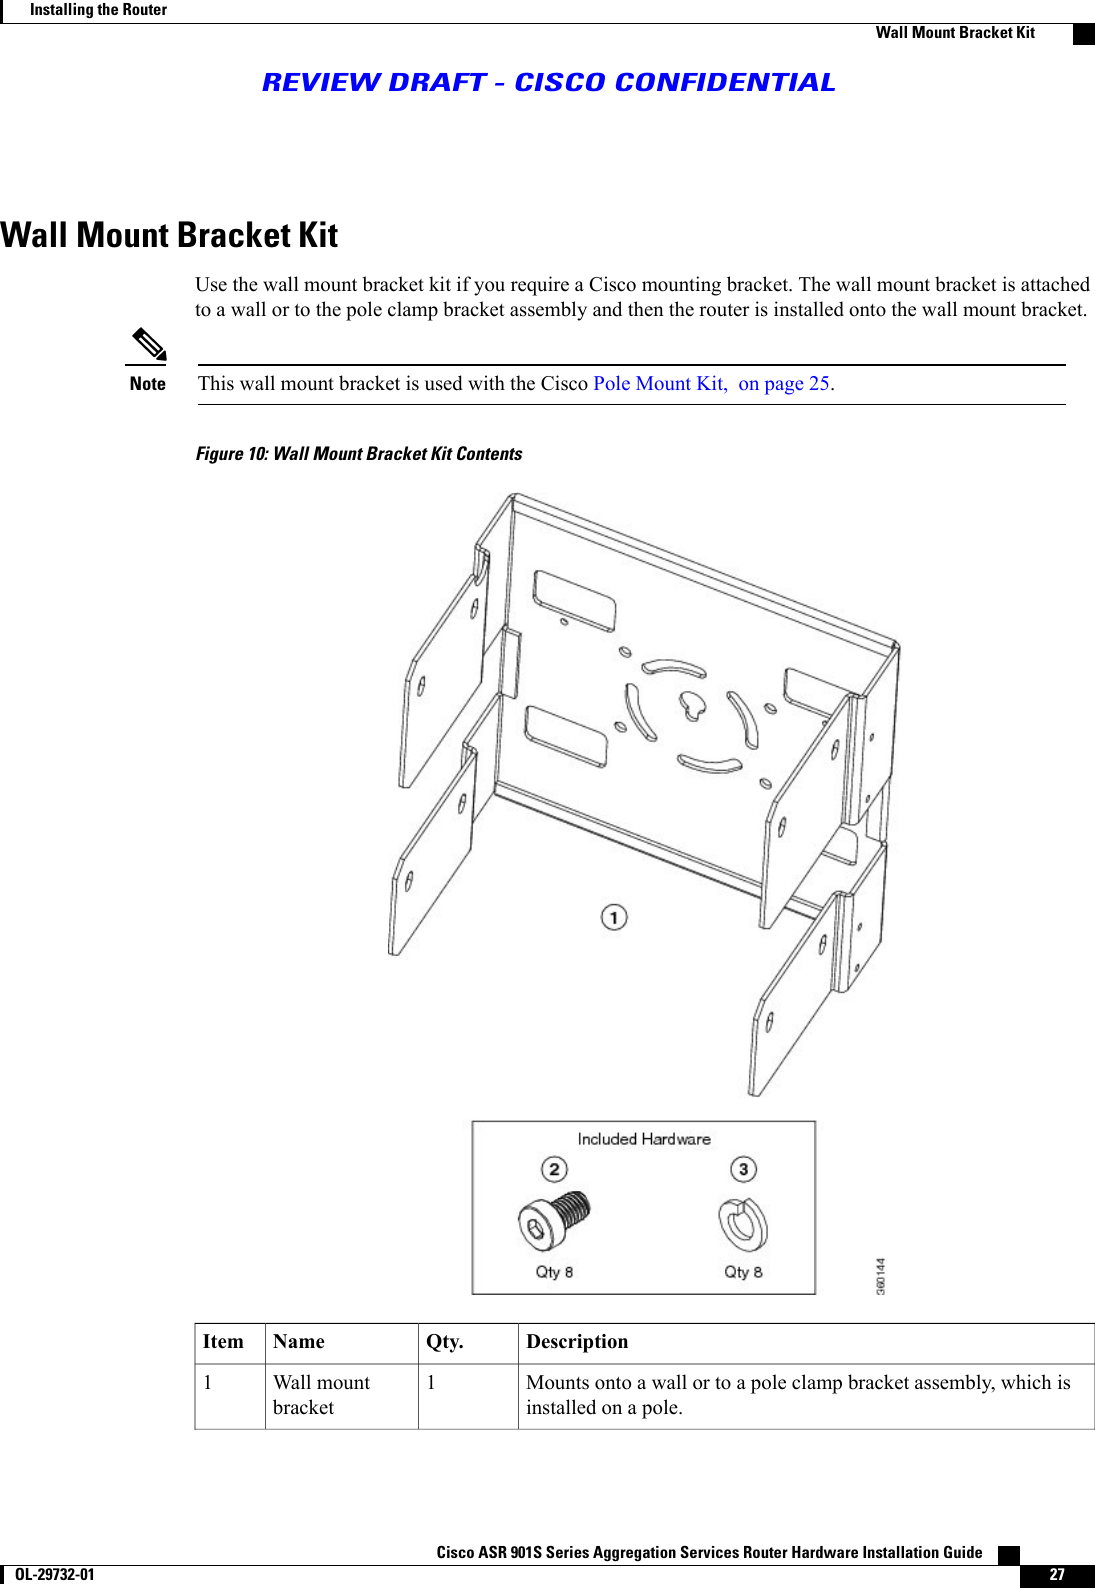 Wall Mount Bracket KitUse the wall mount bracket kit if you require a Cisco mounting bracket. The wall mount bracket is attachedto a wall or to the pole clamp bracket assembly and then the router is installed onto the wall mount bracket.This wall mount bracket is used with the Cisco Pole Mount Kit, on page 25.NoteFigure 10: Wall Mount Bracket Kit ContentsDescriptionQty.NameItemMounts onto a wall or to a pole clamp bracket assembly, which isinstalled on a pole.1Wall mountbracket1Cisco ASR 901S Series Aggregation Services Router Hardware Installation Guide       OL-29732-01 27Installing the RouterWall Mount Bracket KitREVIEW DRAFT - CISCO CONFIDENTIAL